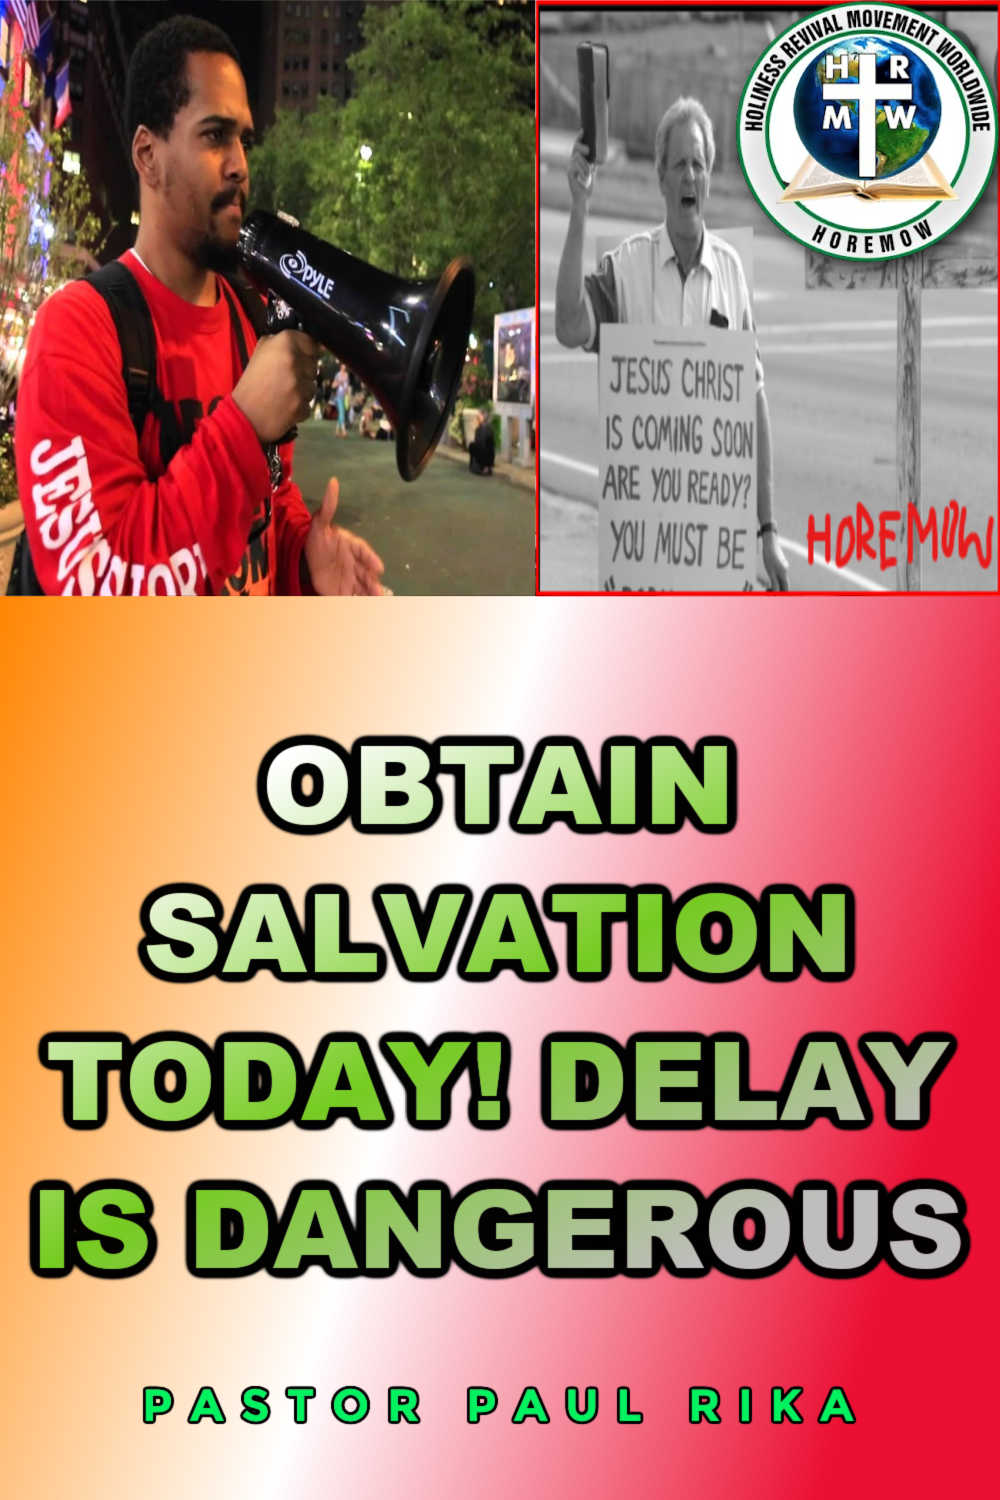 Delay is Dangerous for You.